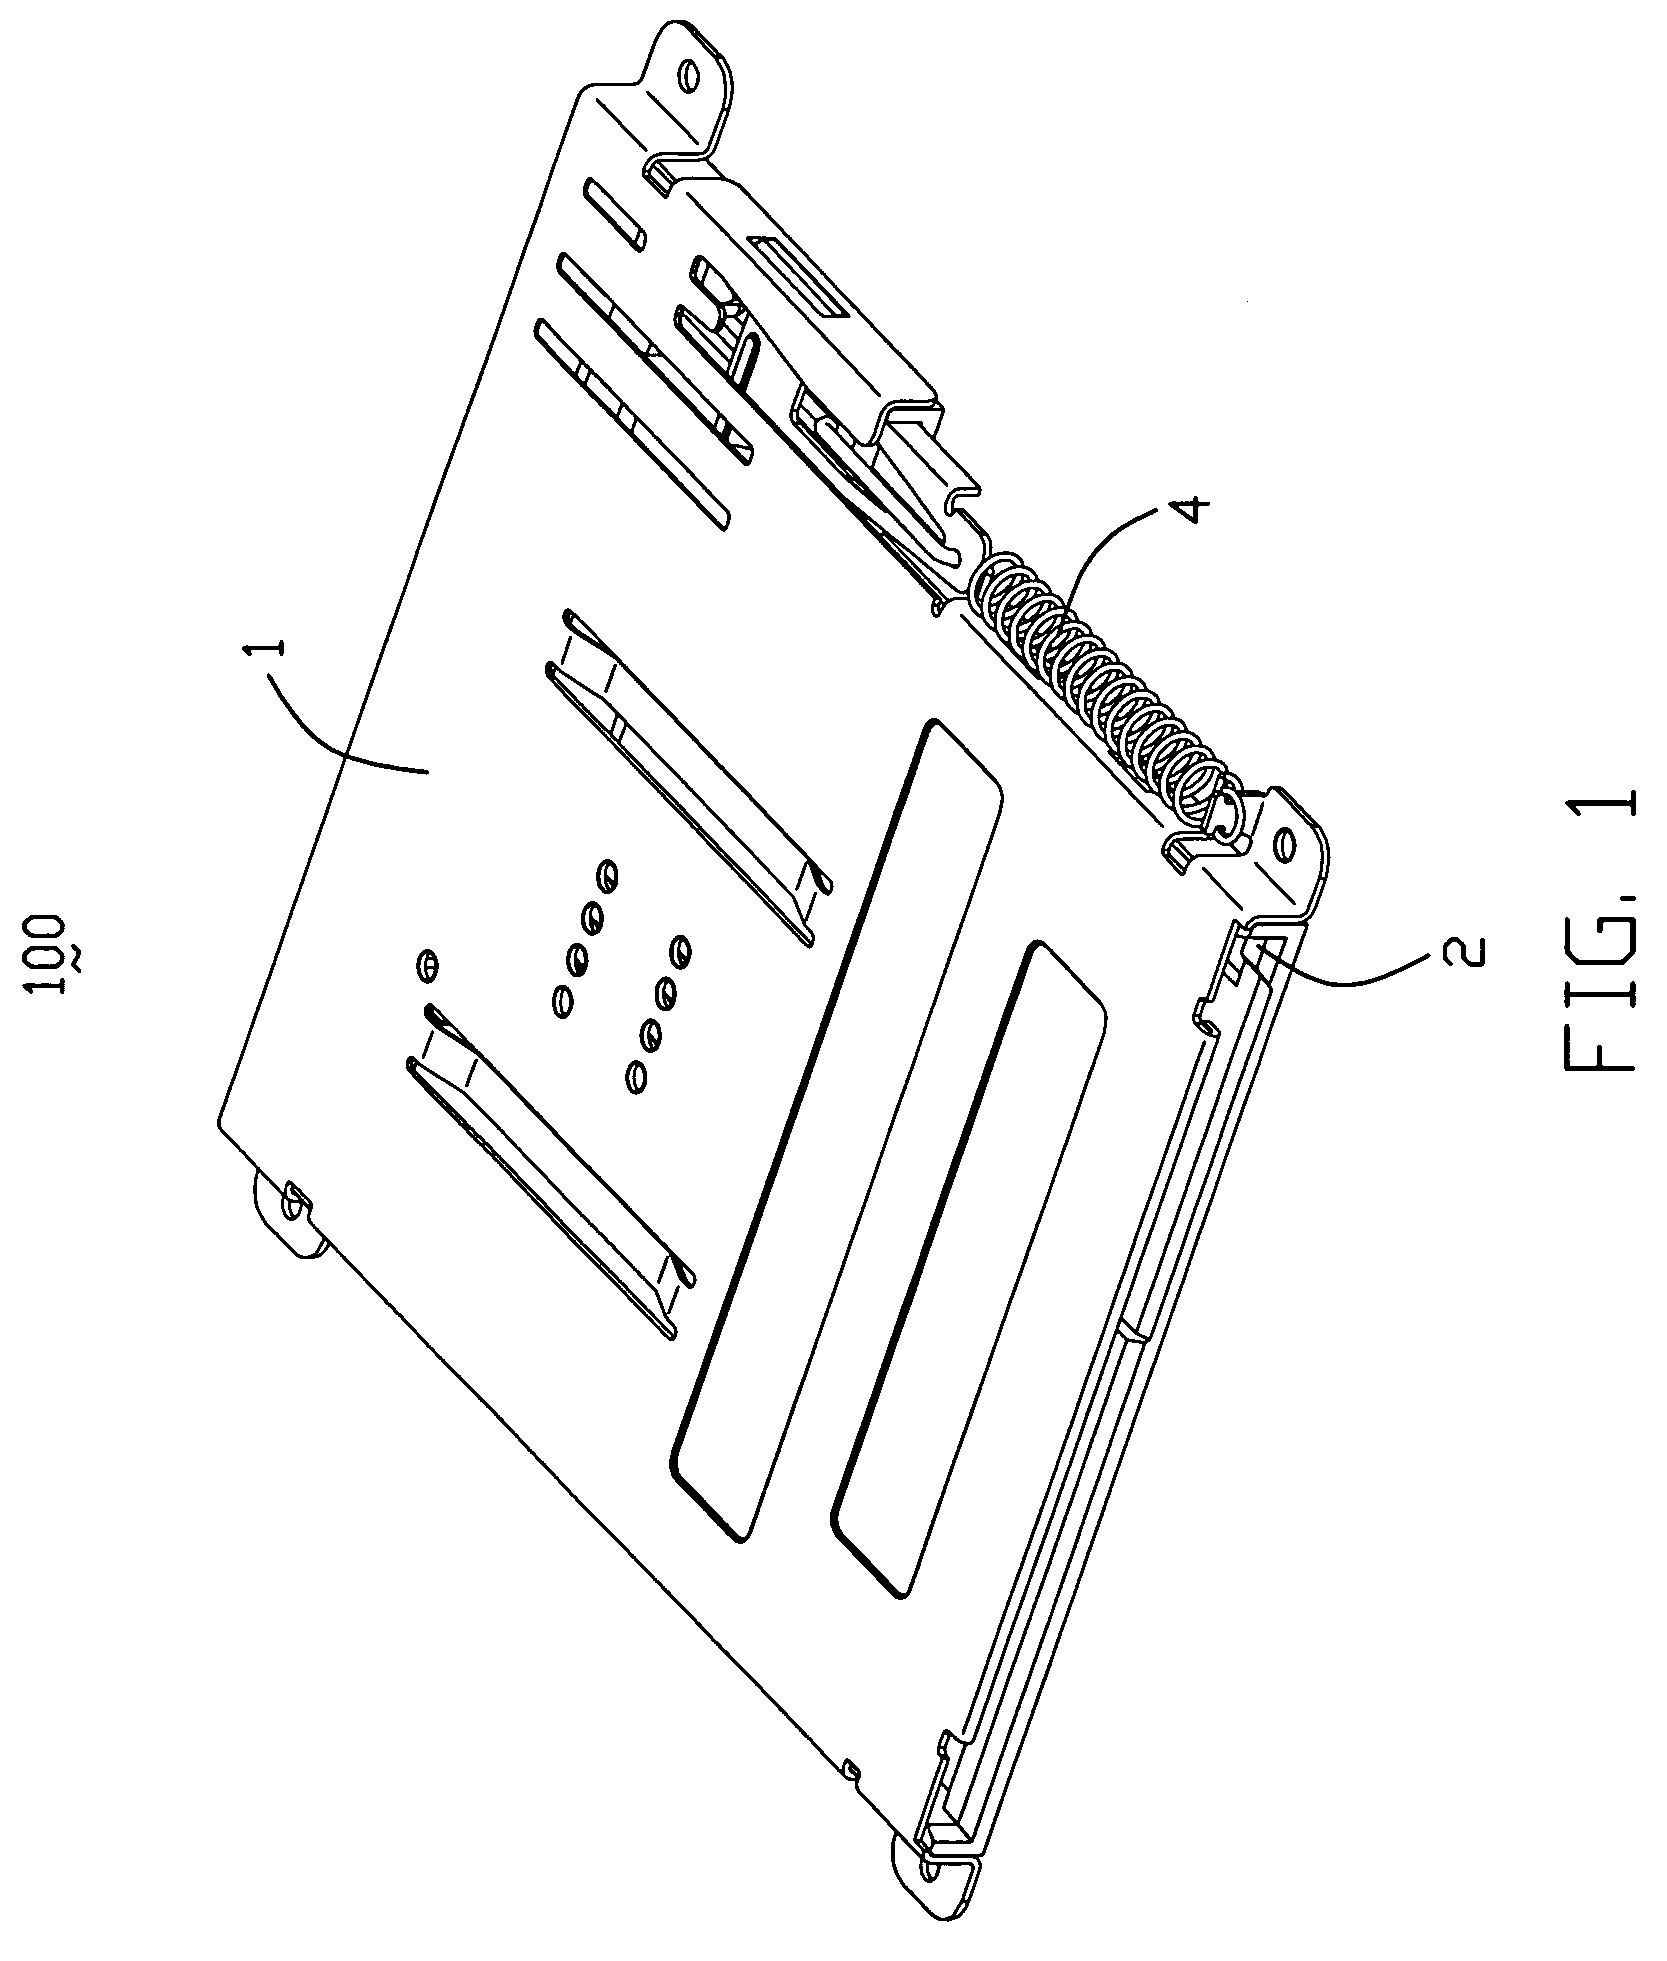 Electrical card connector